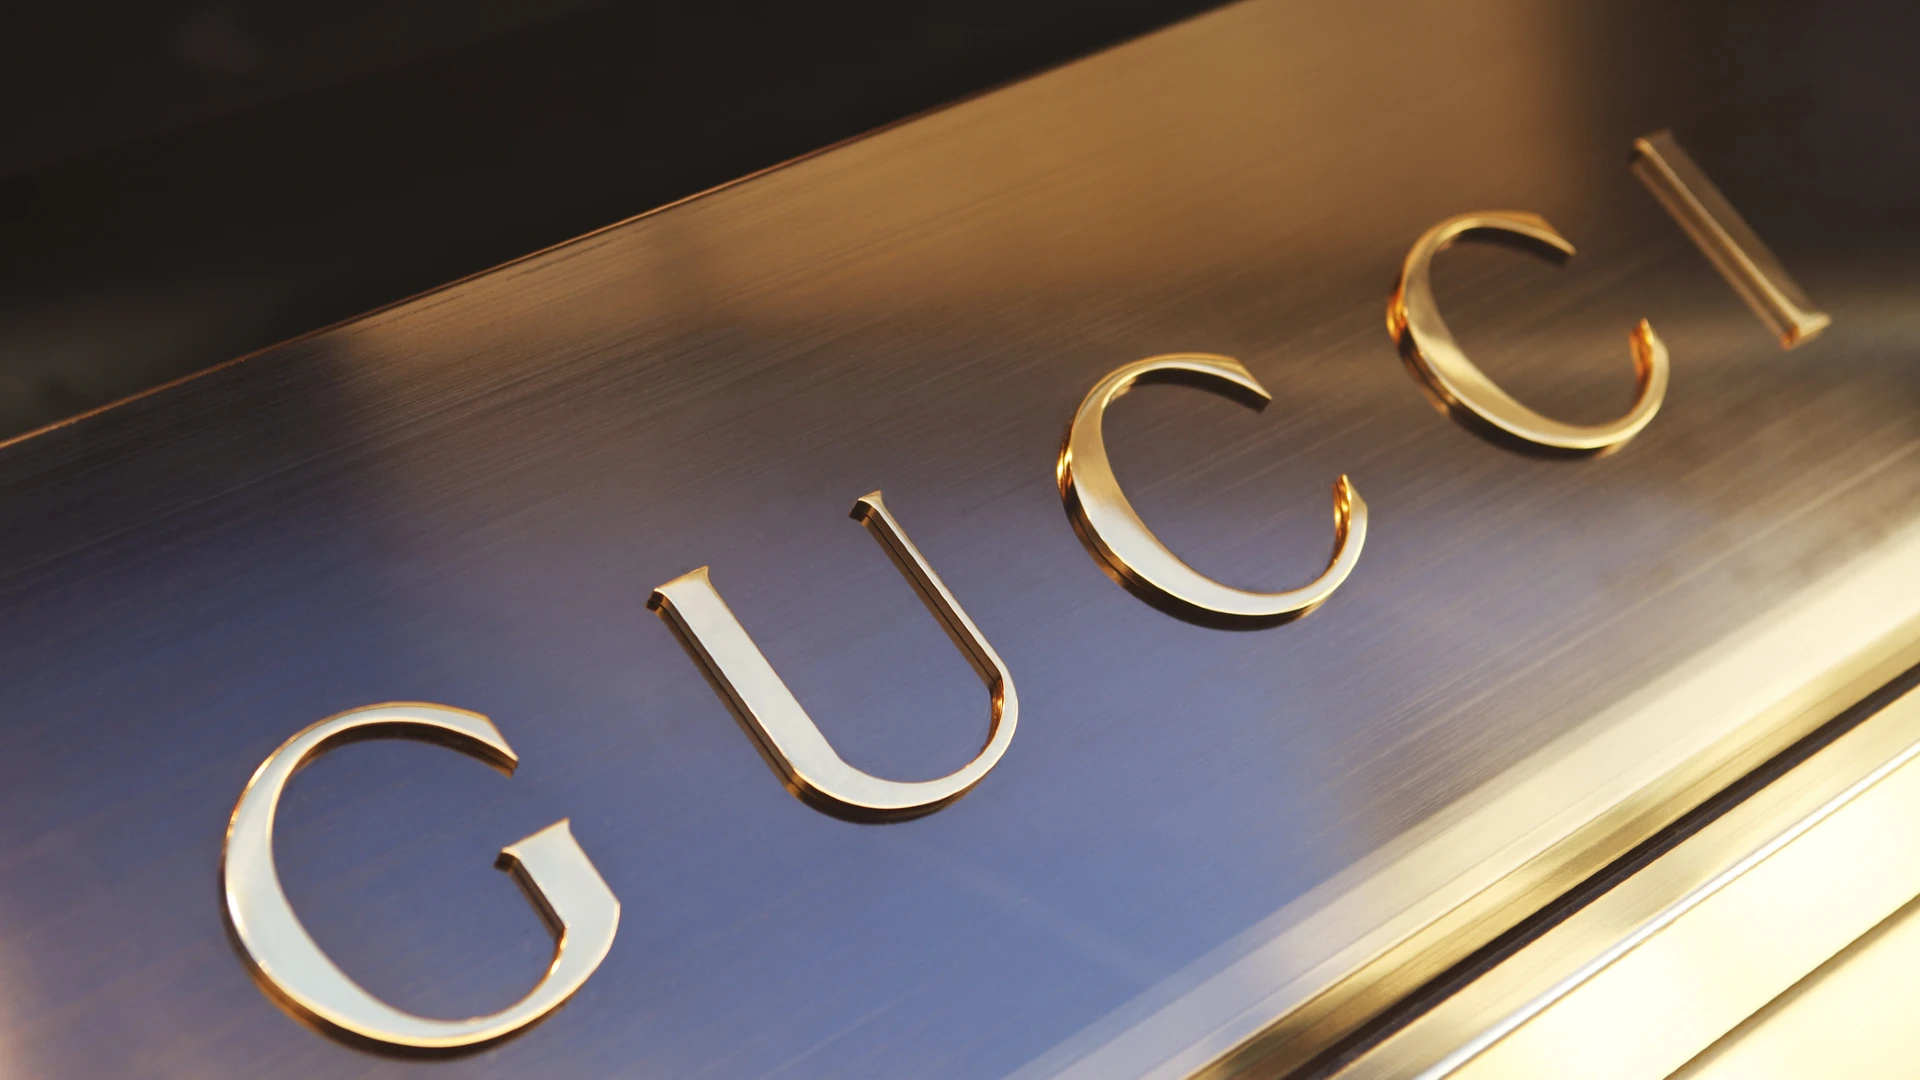 Who owns the Gucci brand now?